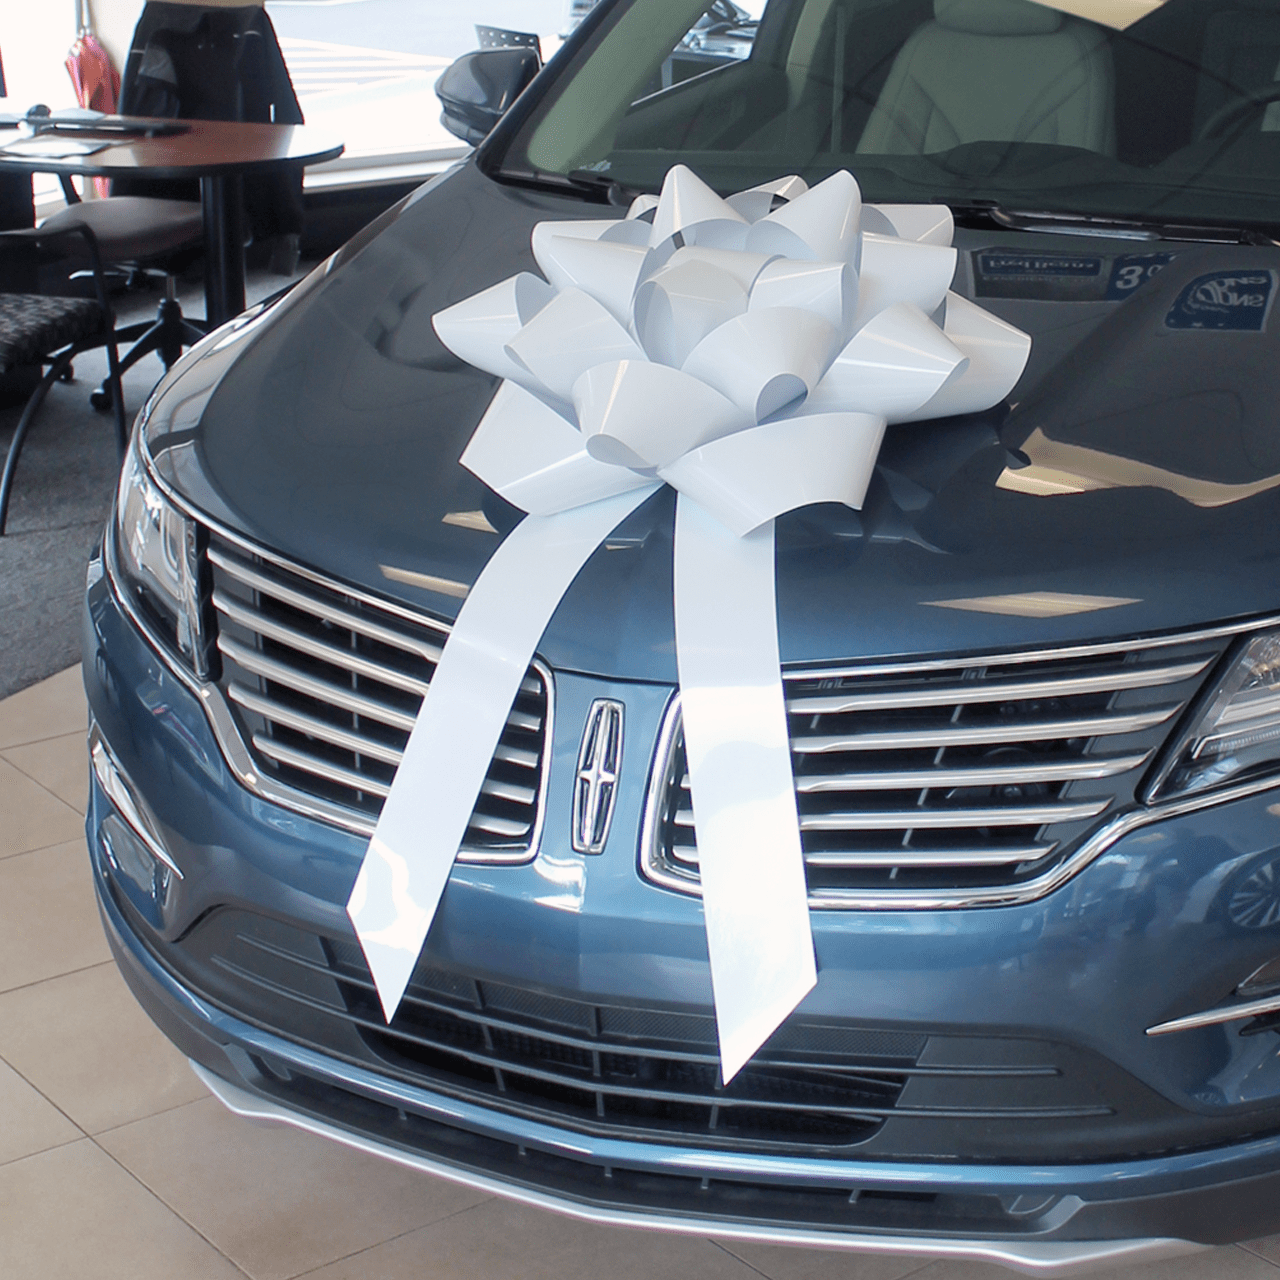 28 Big Gift Car Bows - Great American Auto